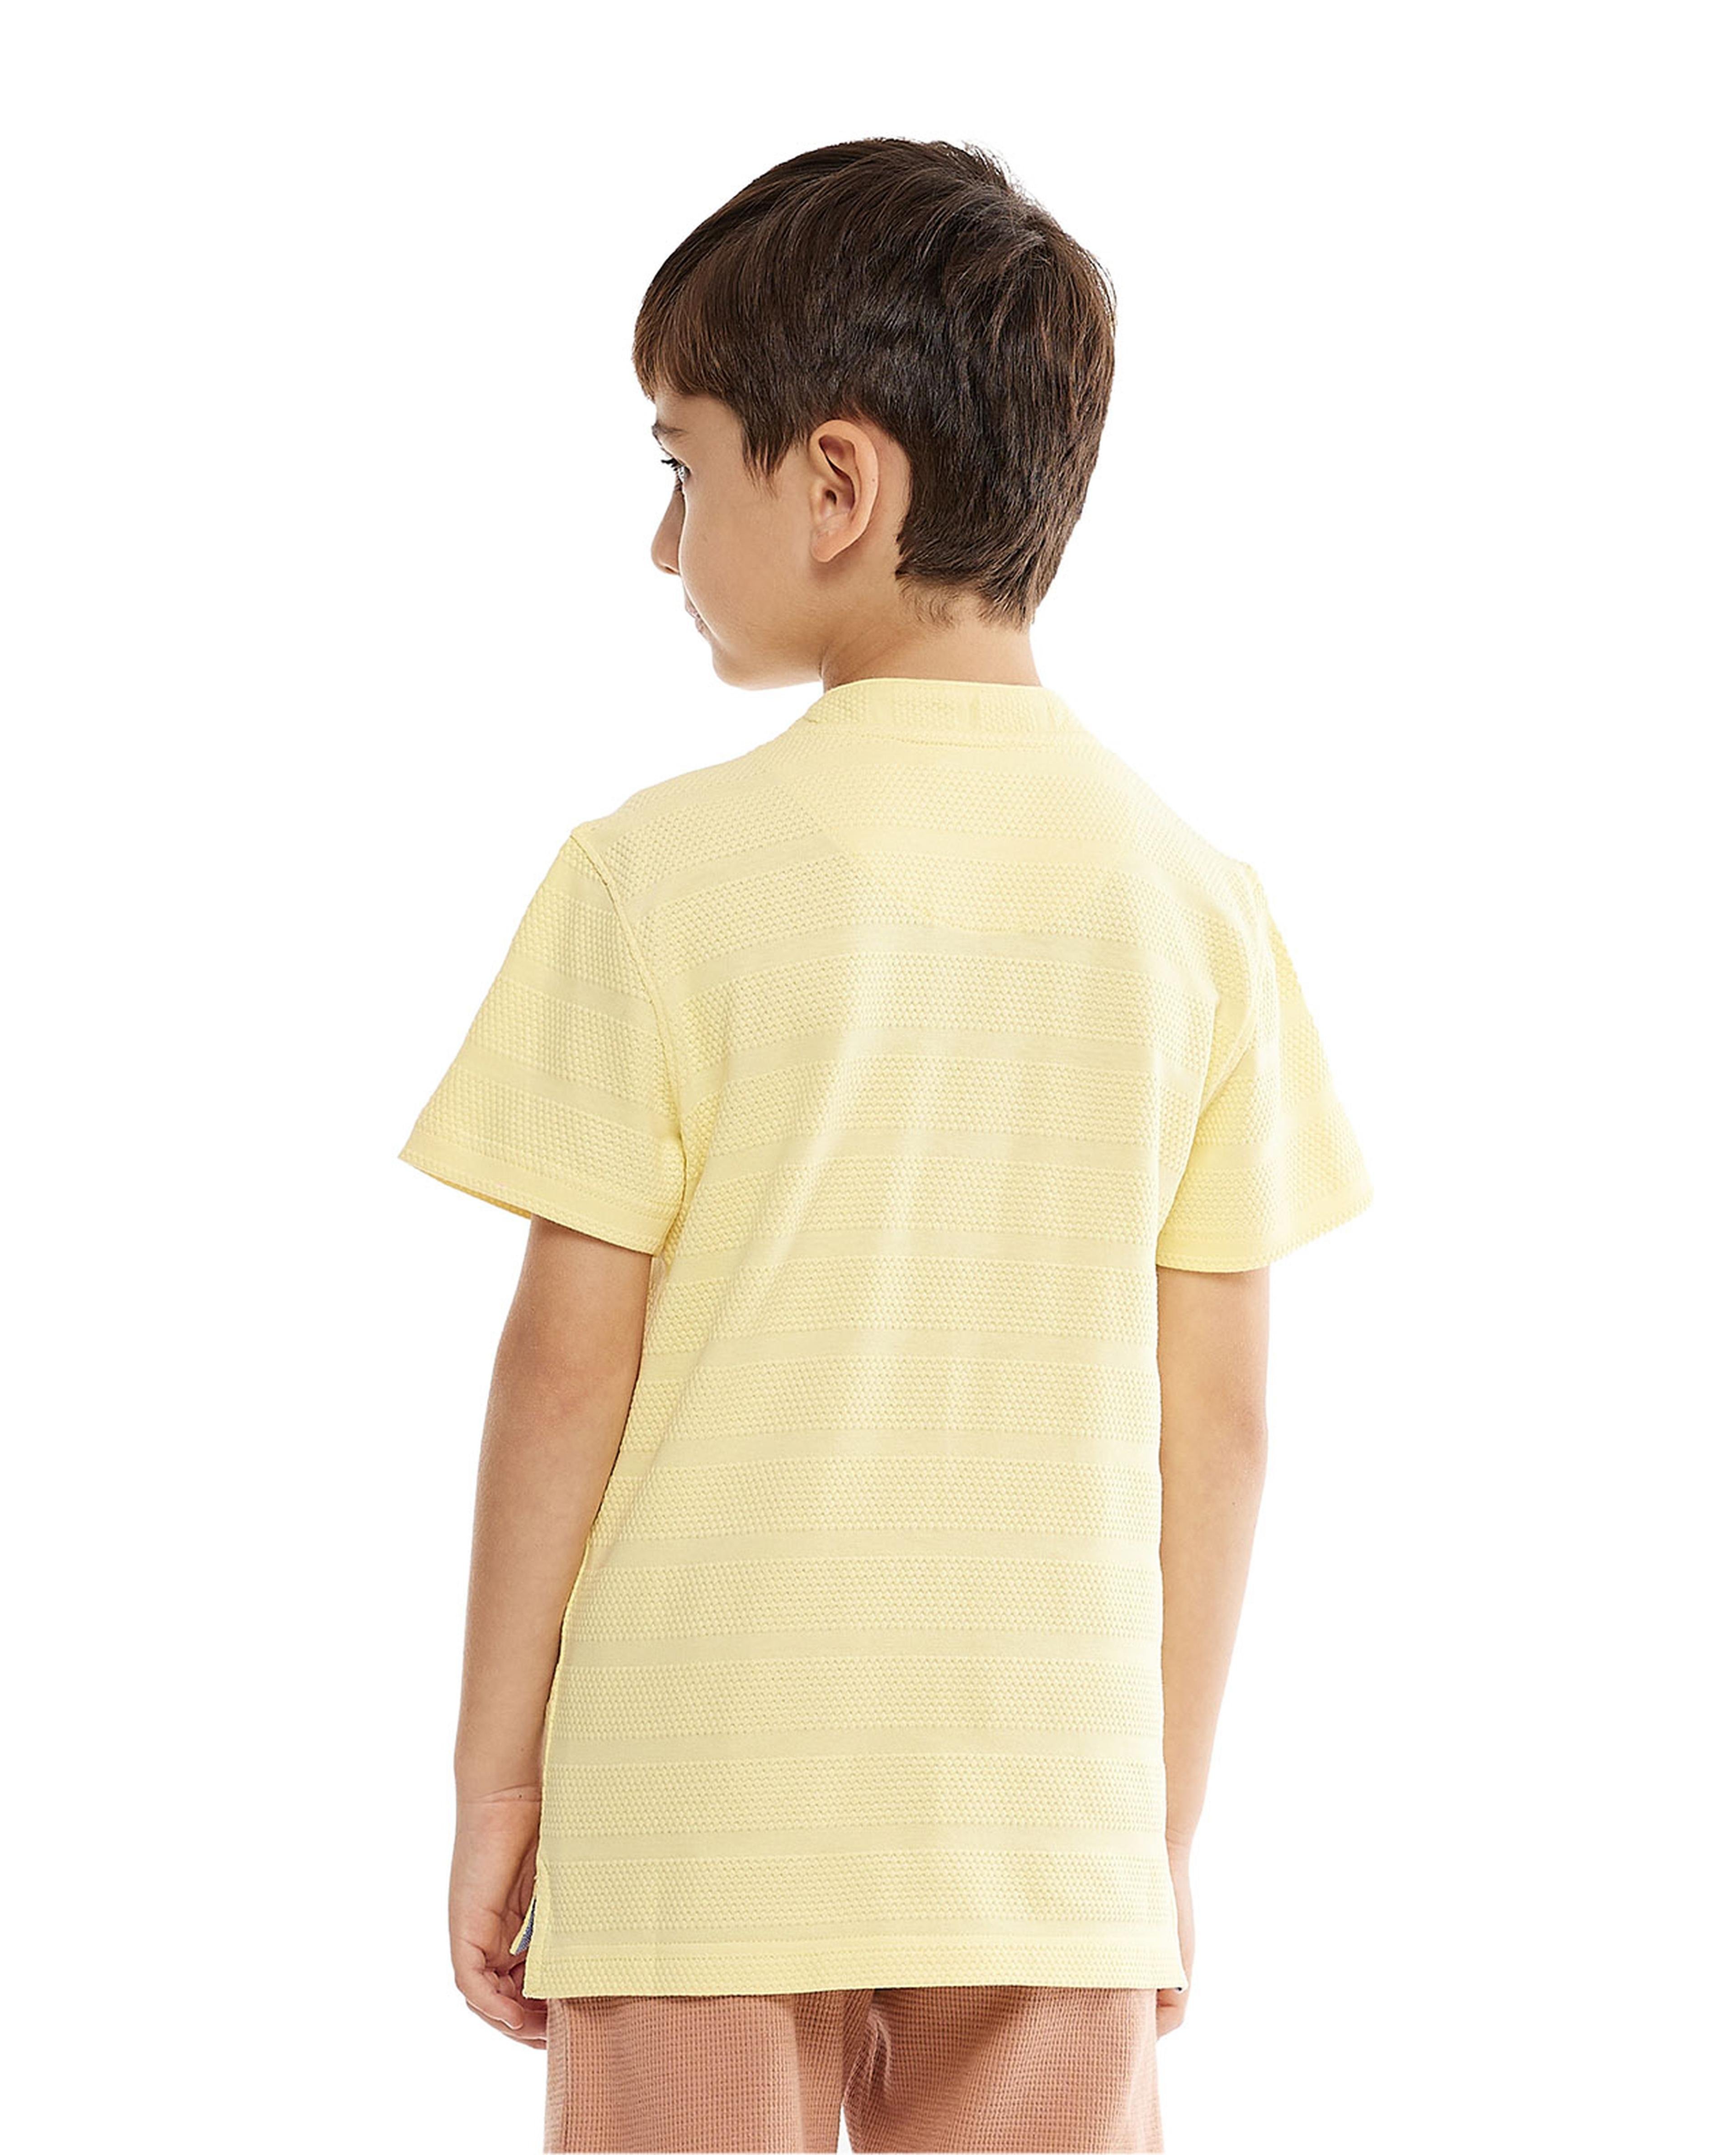 Textured T-Shirt with Mandarin Collar and Short Sleeves